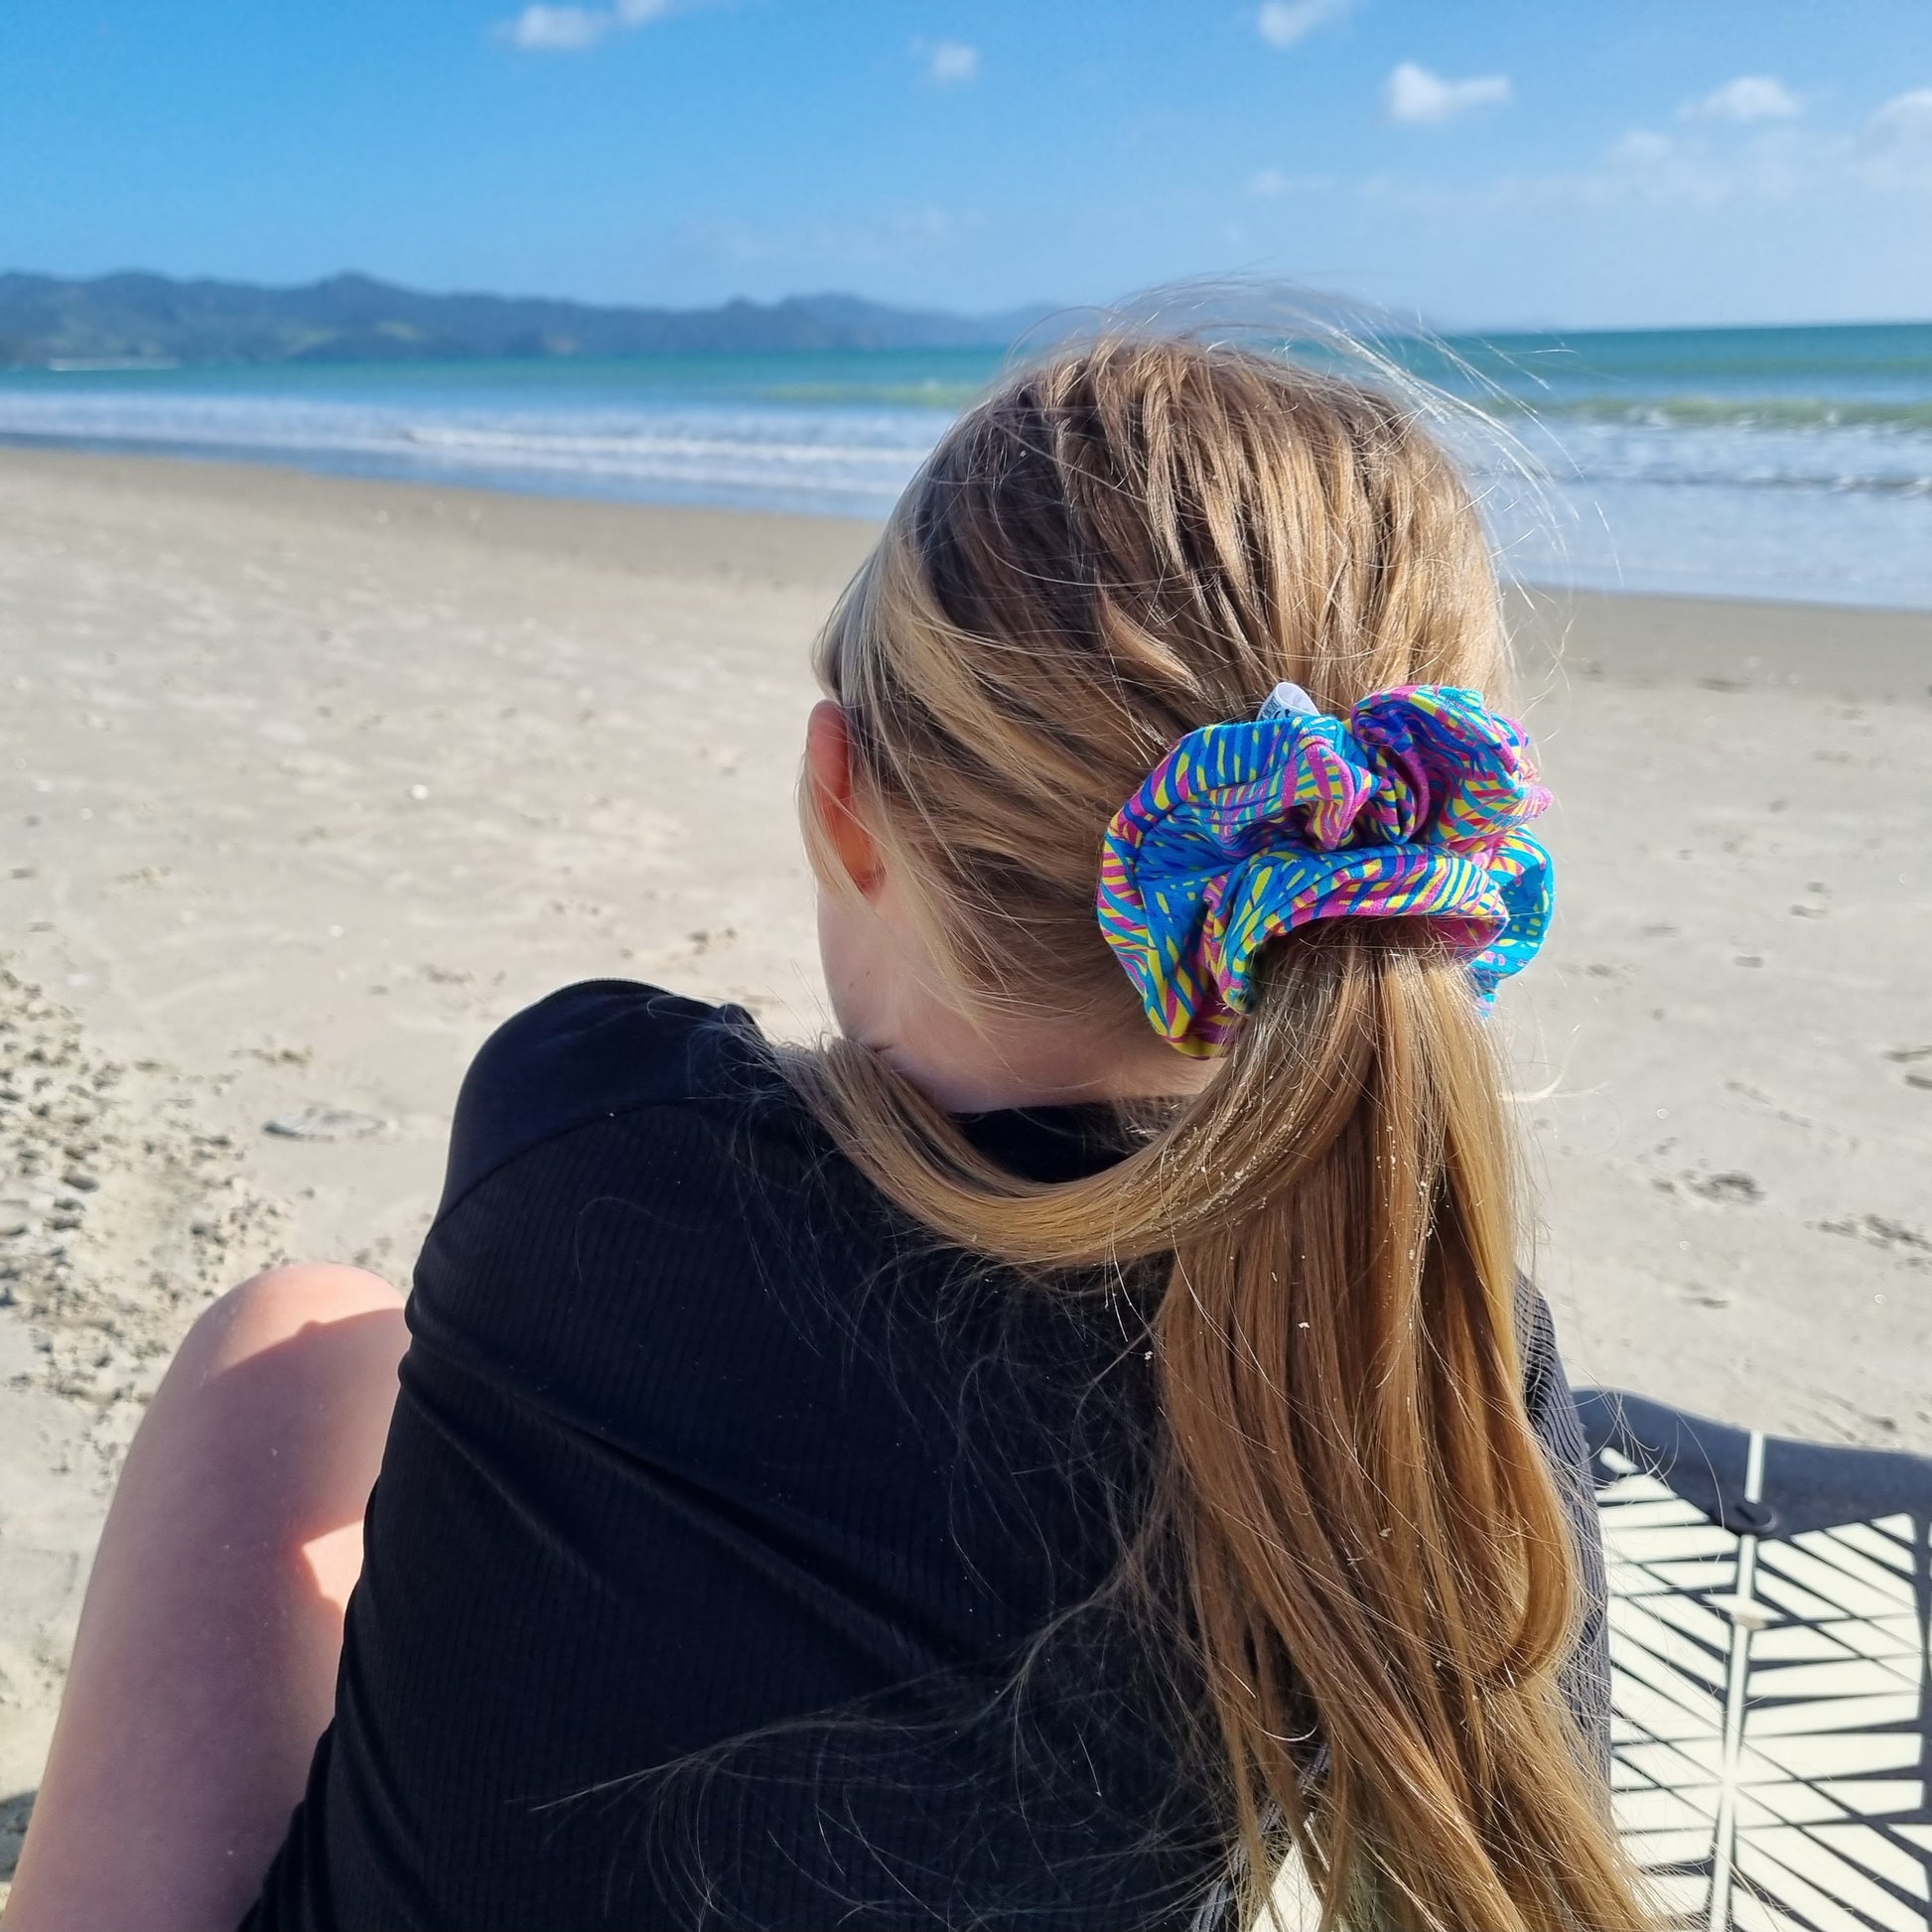 Scrunchie - Rainbow Stripes tied in girls hair at the beach. Blue, navy and hot pink stripes on yellow background.